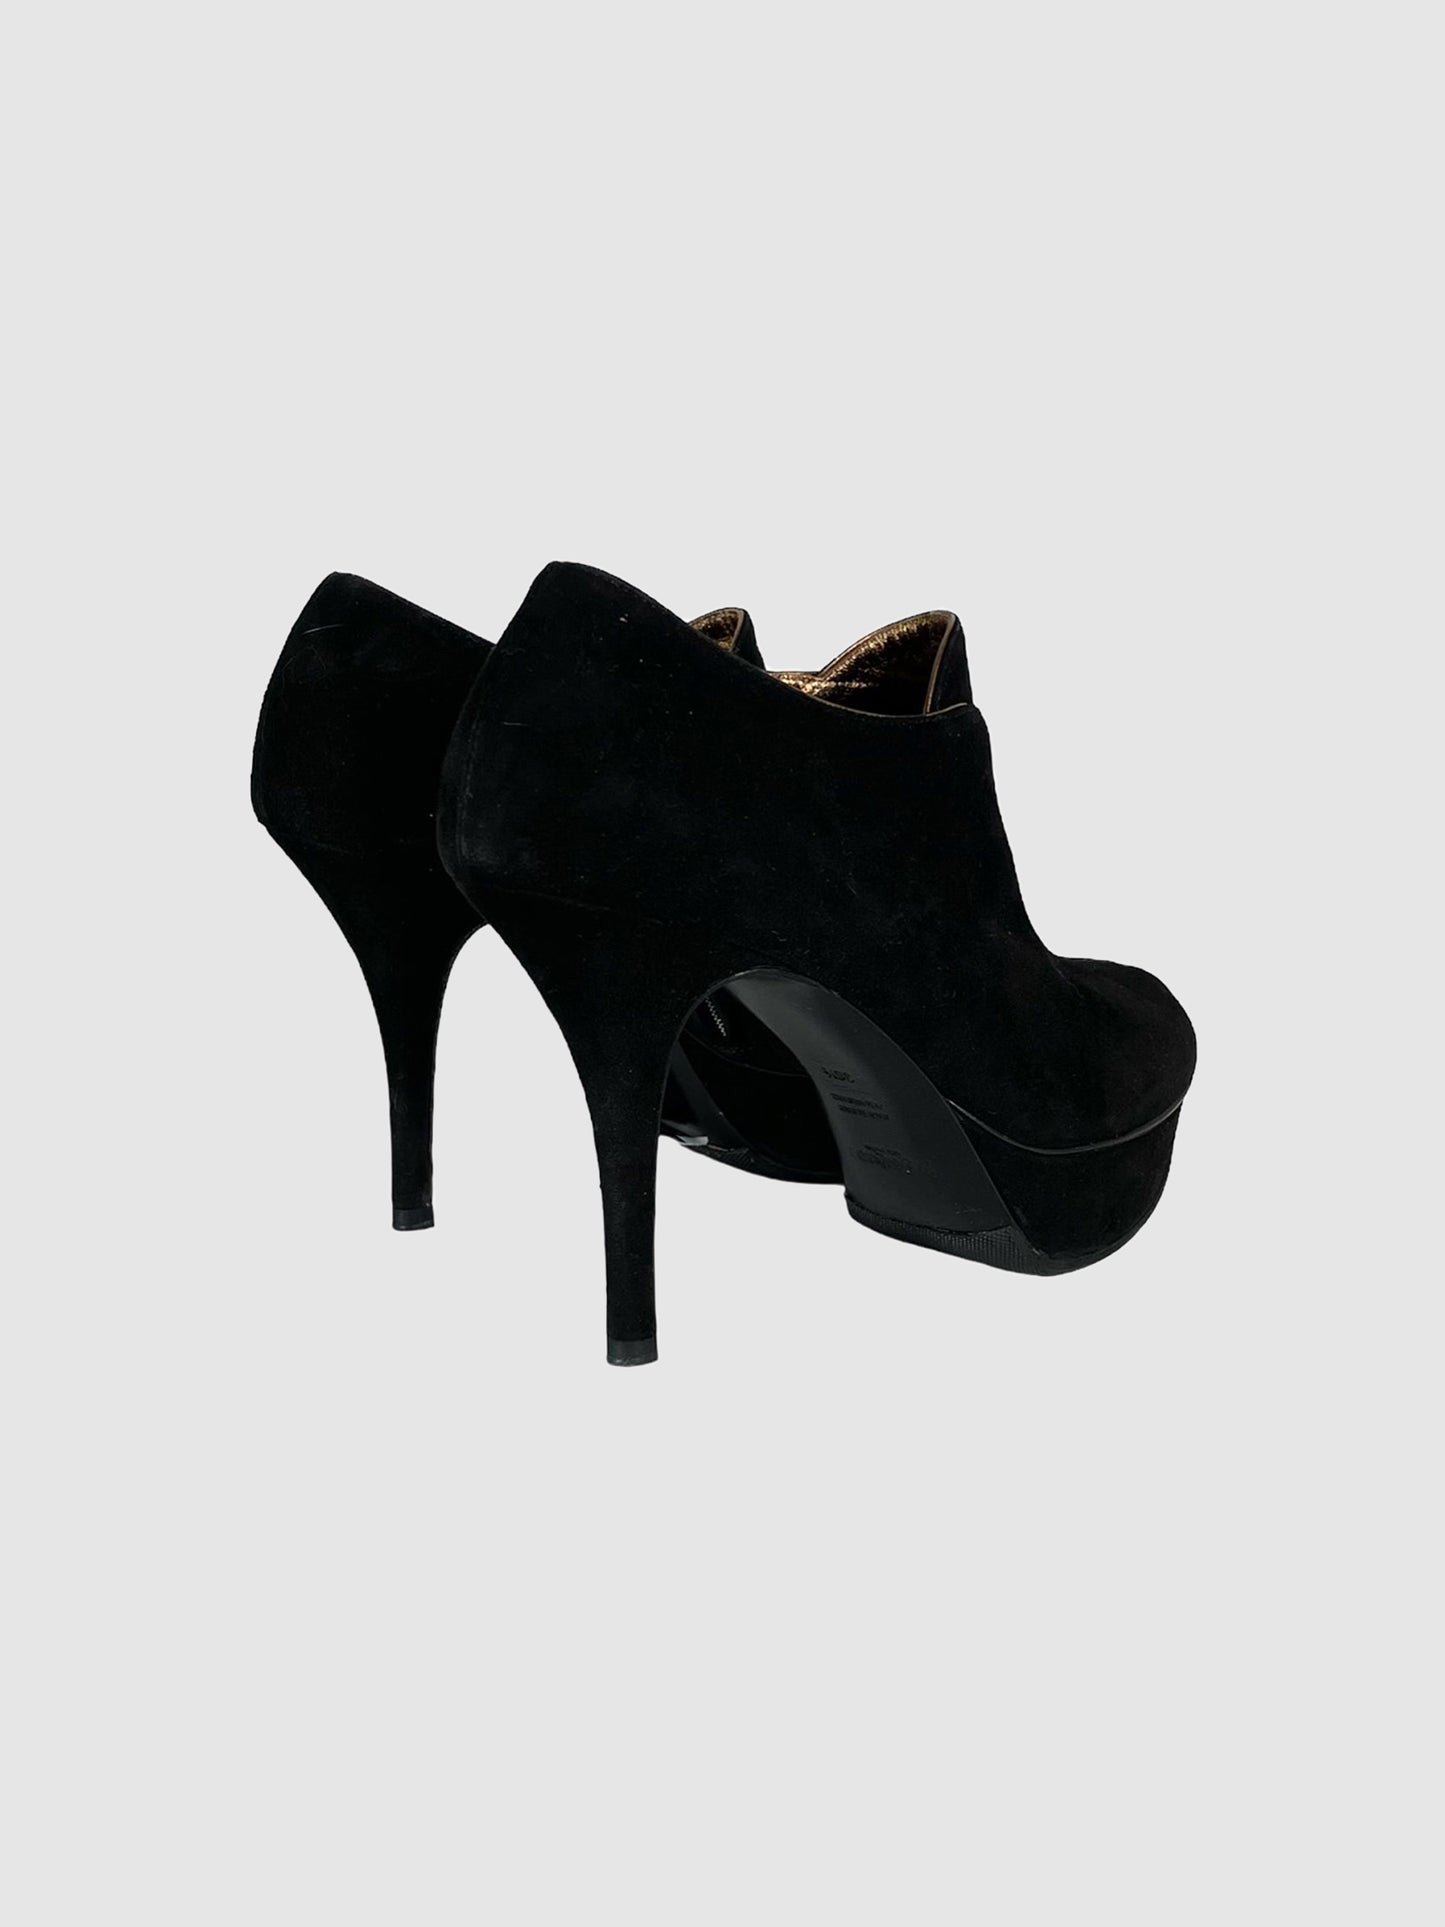 TribToo Ankle Booties - Size 36.5